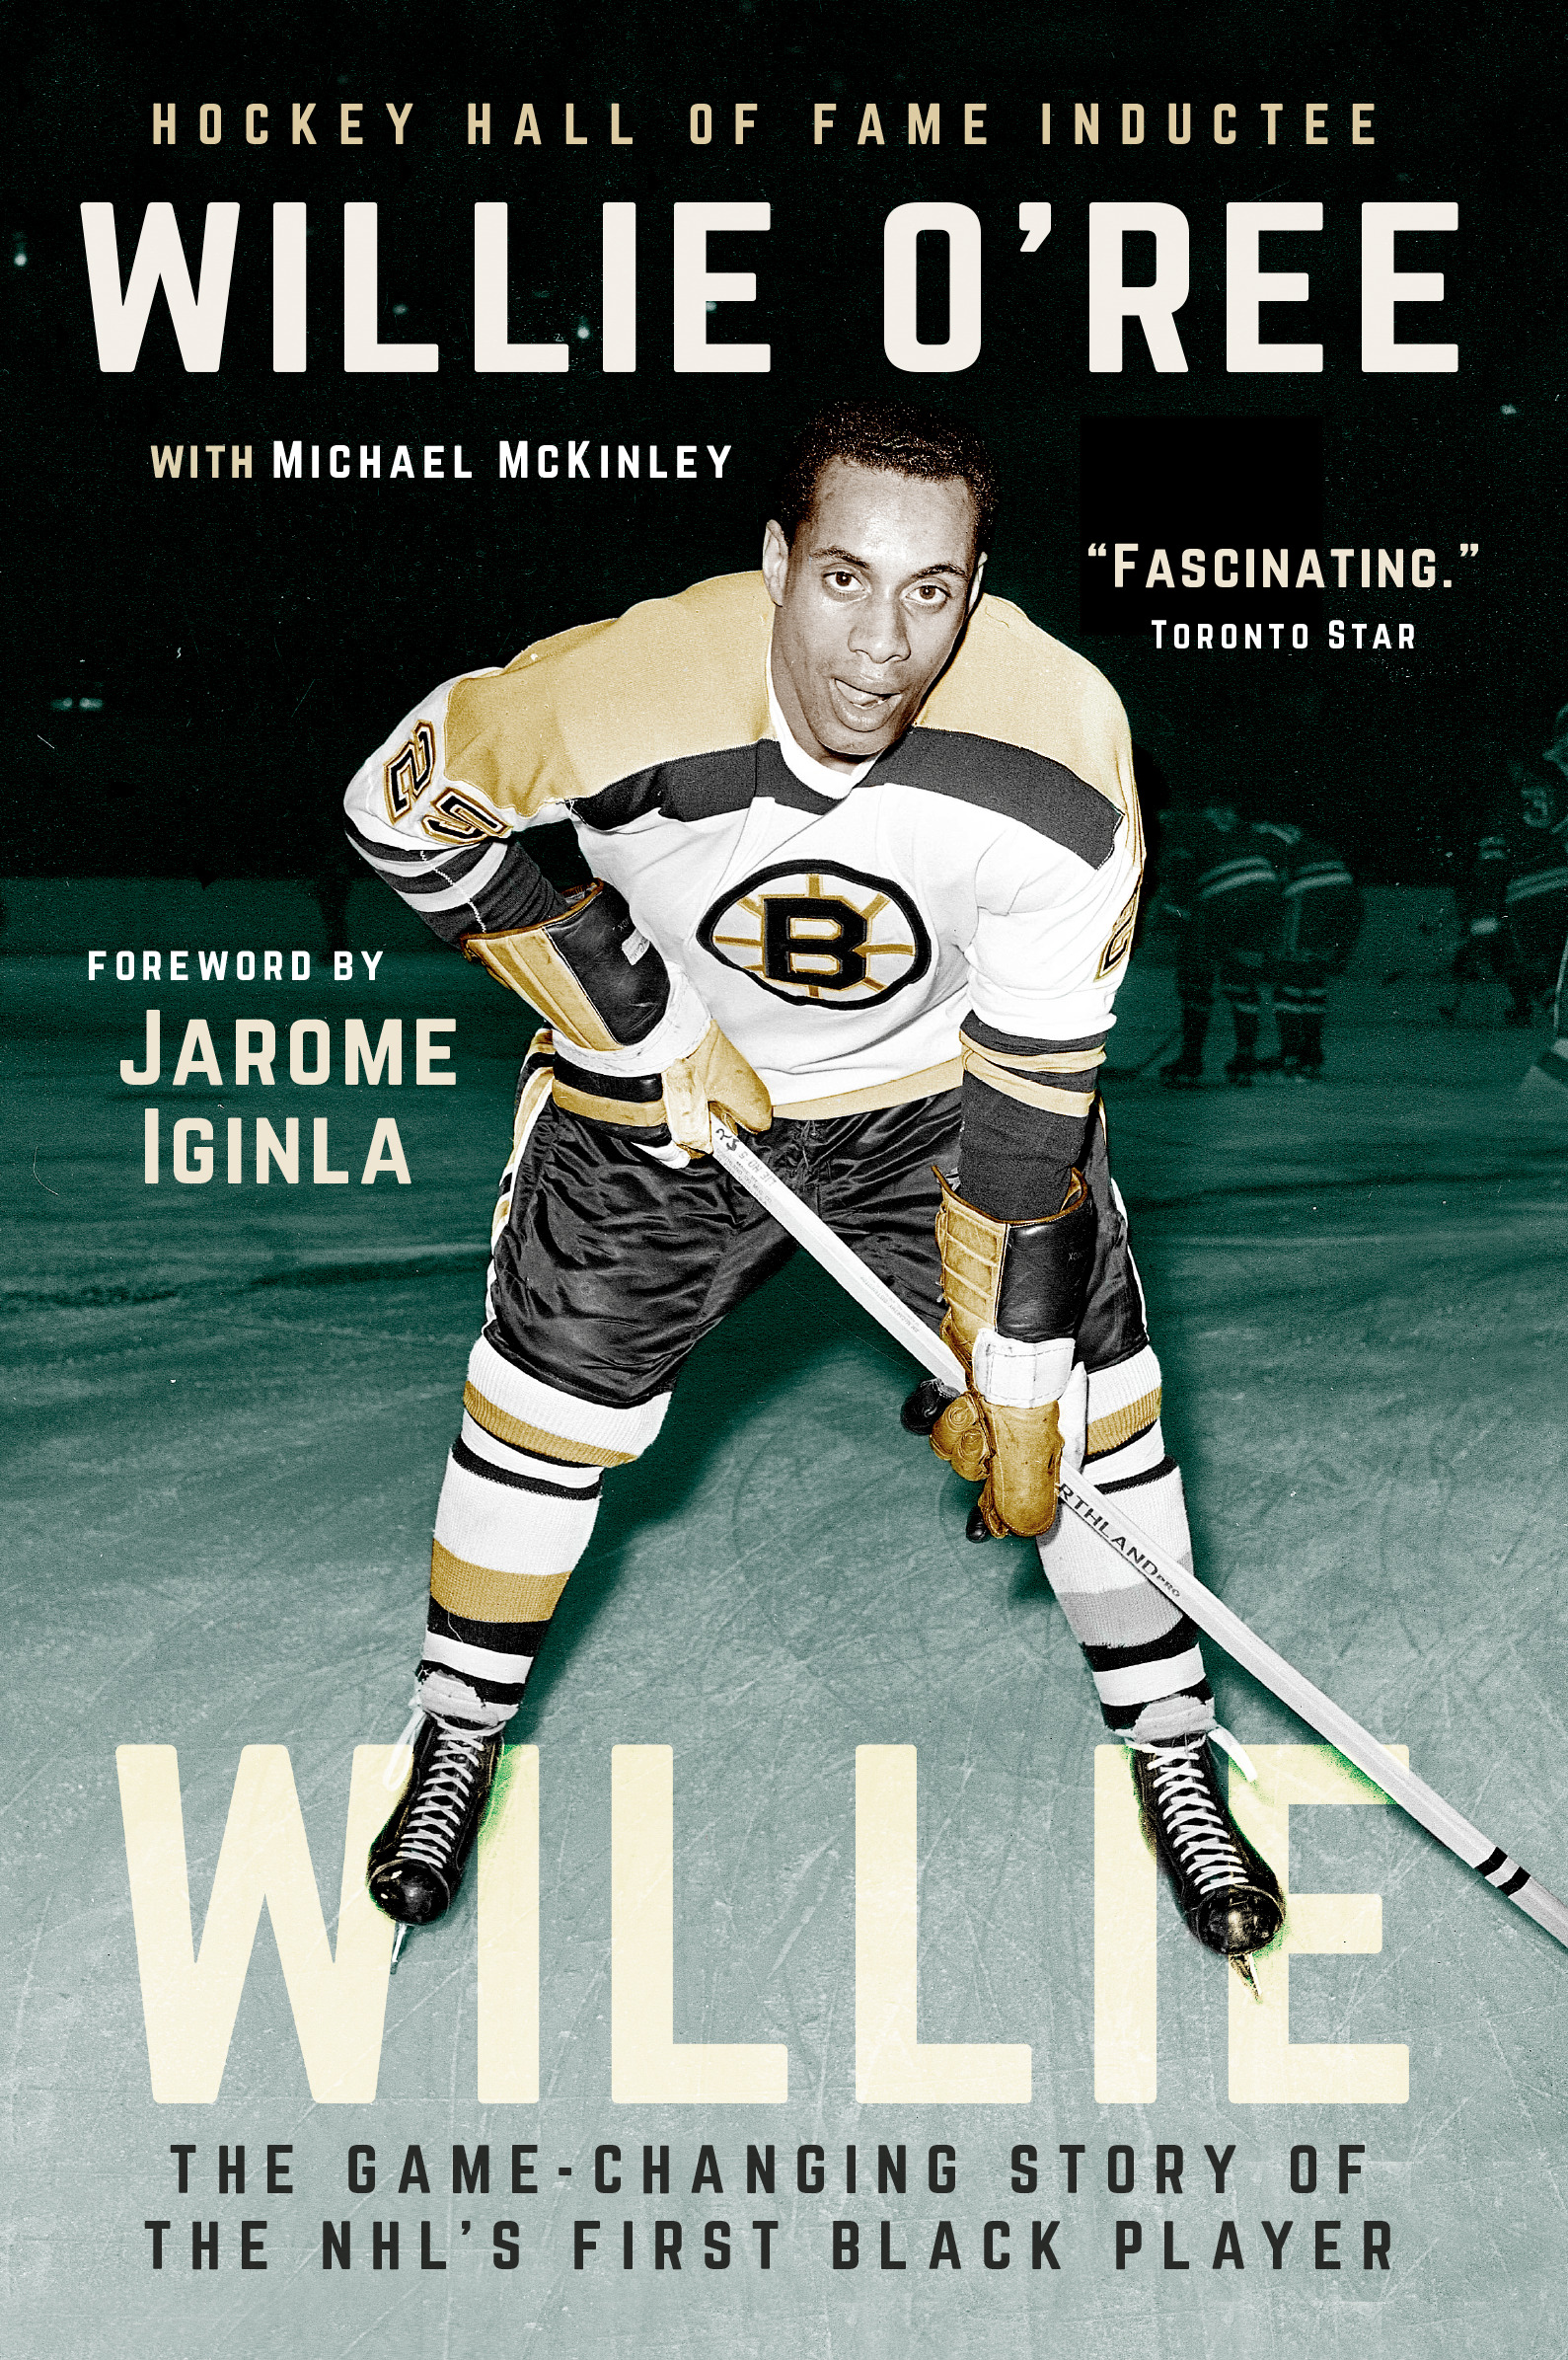 Willie : The Game-Changing Story of the NHL's First Black Player | O'Ree, Willie